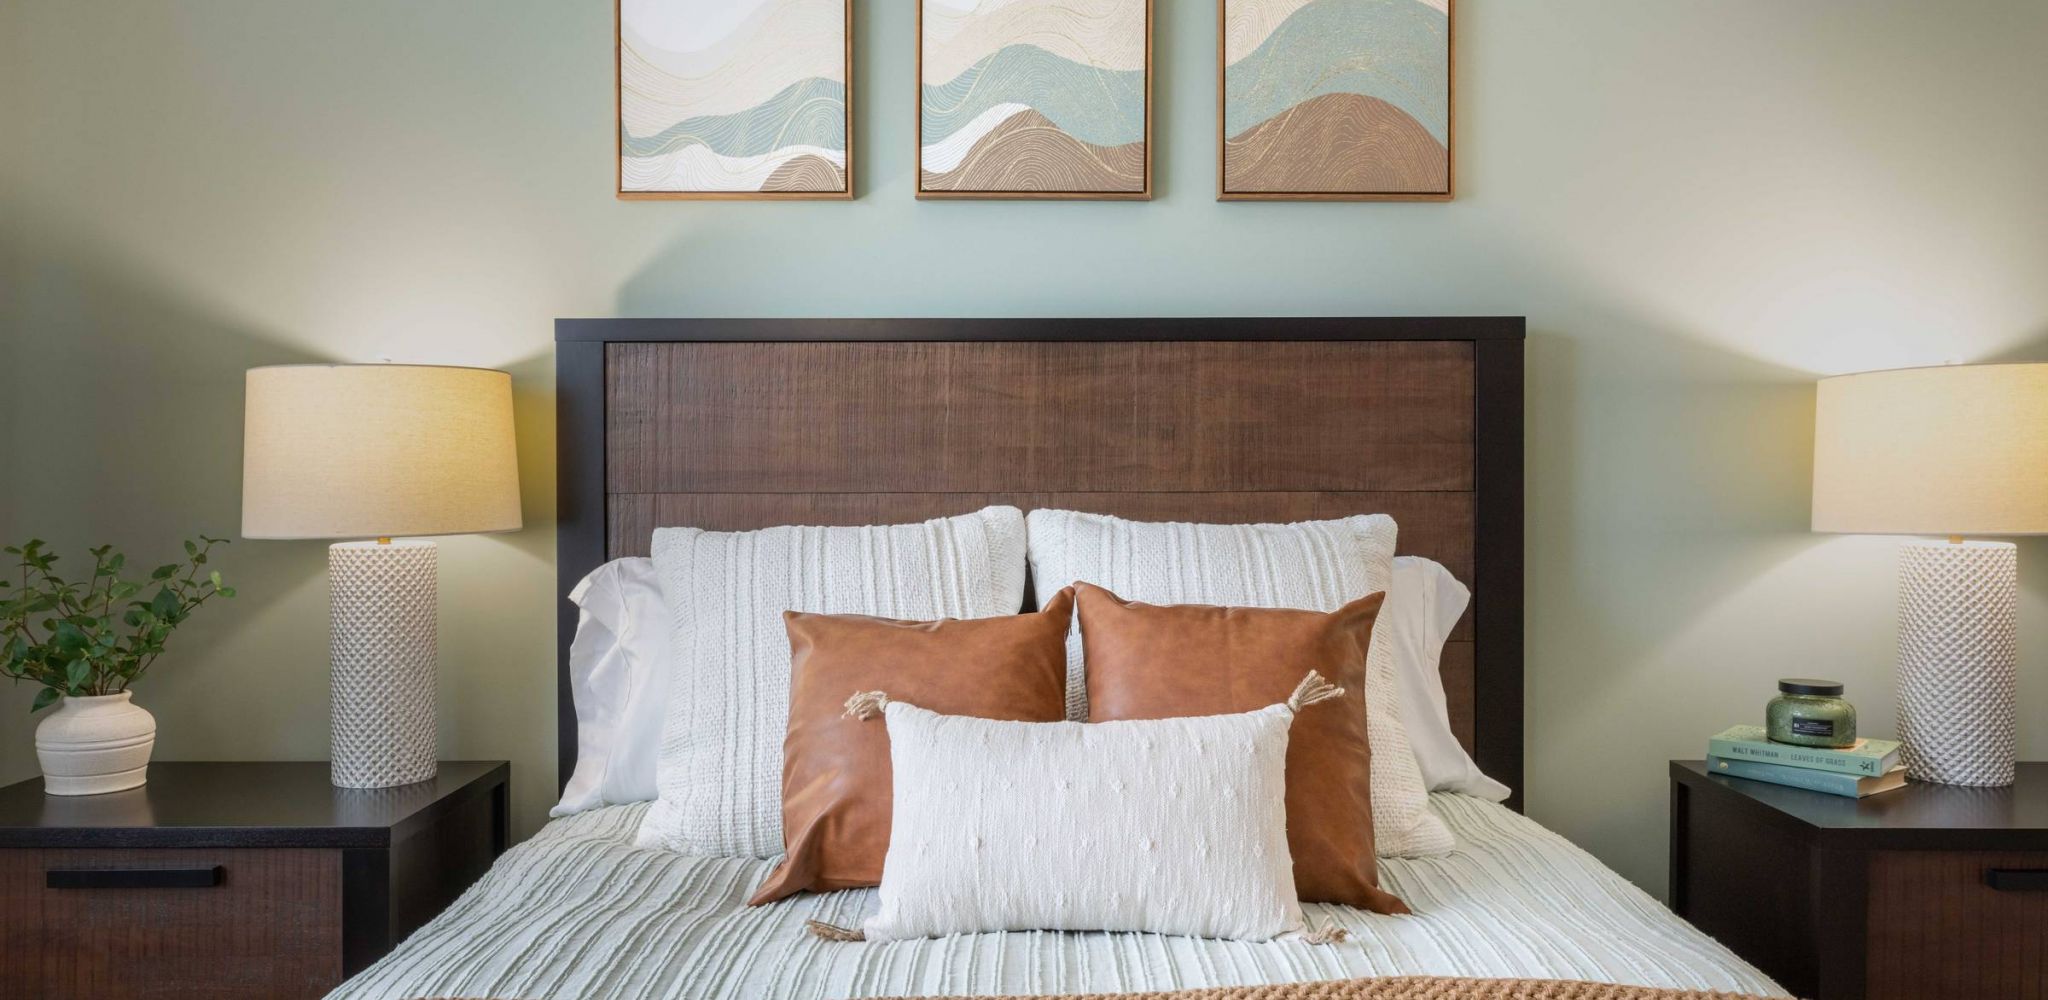 Hawthorne at Lelandclose-up of queen-sized bed in apartment bedroom with an two night stands, and an earth-tone color palette.